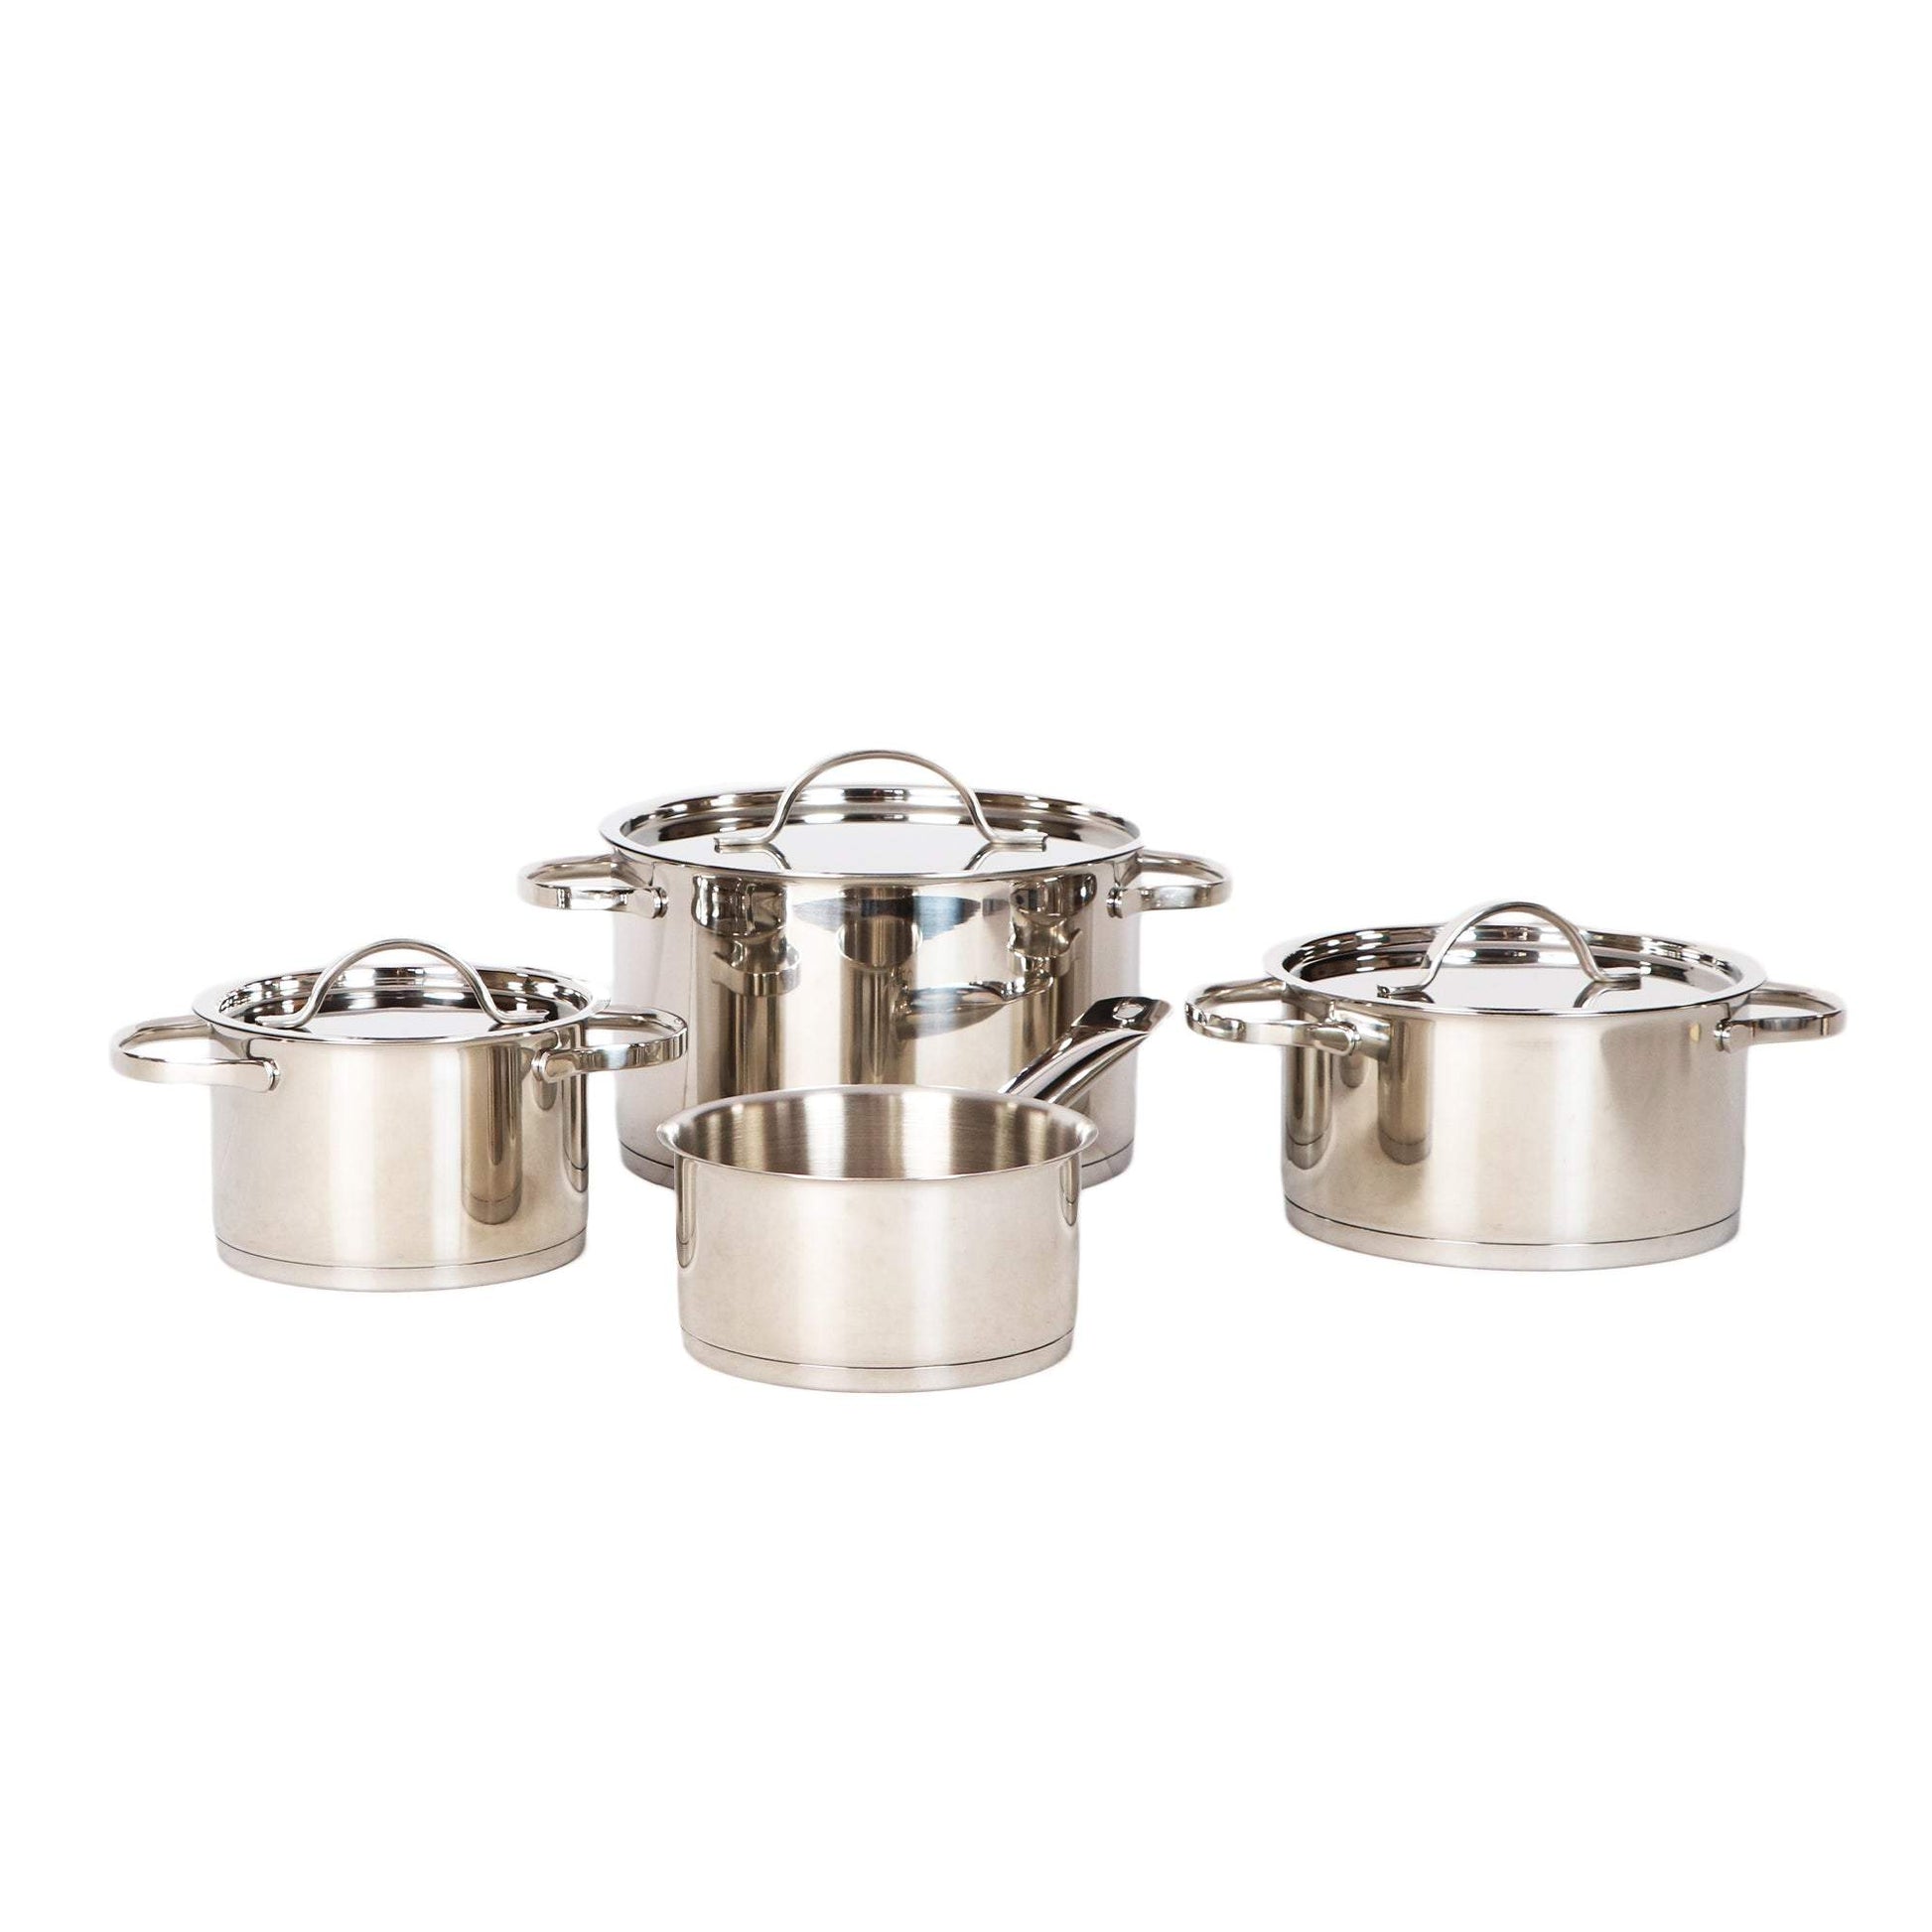 BRK Stainless Cookware set 6 pieces-Royal Brands Co-